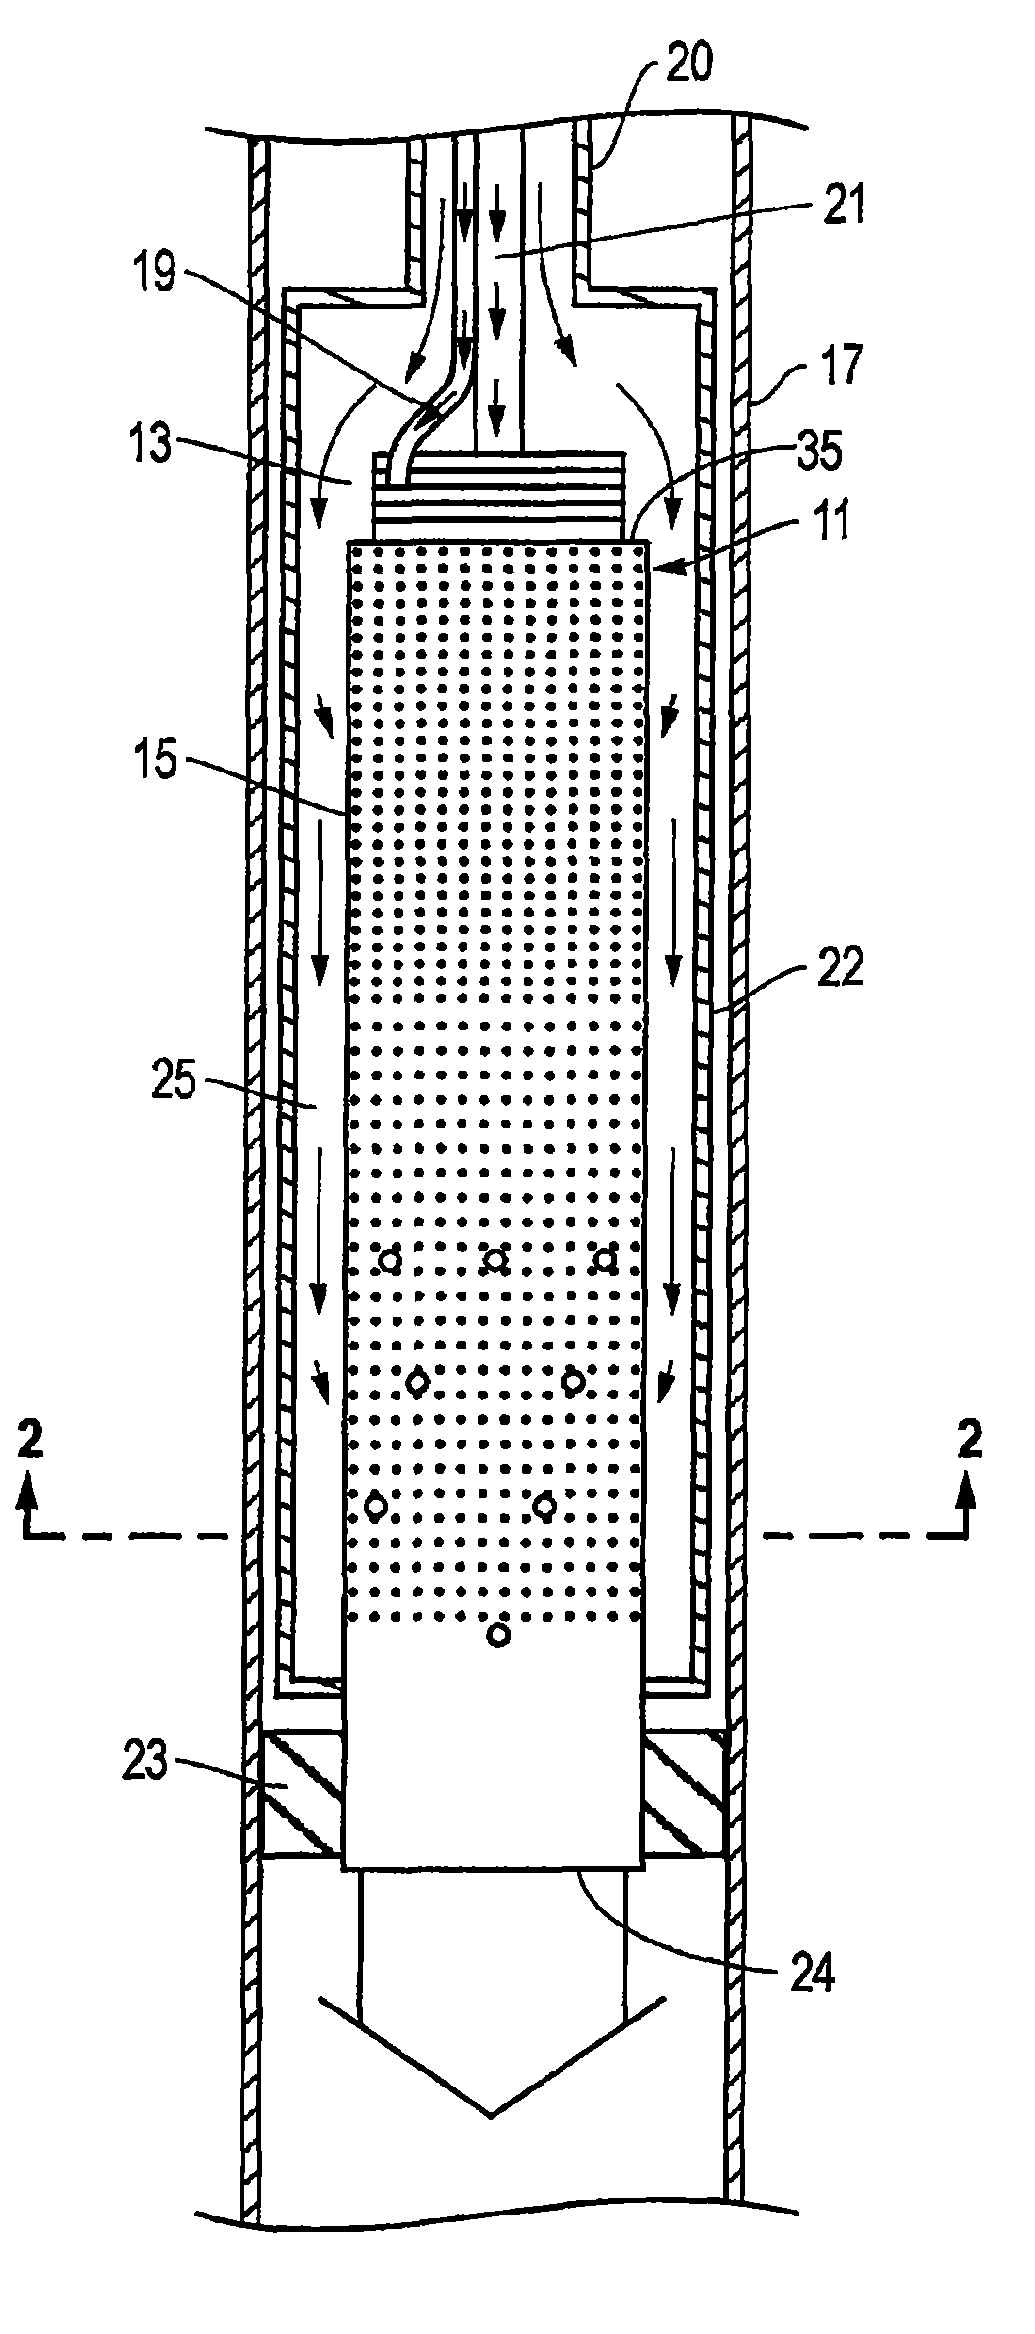 Process for dispersing nanocatalysts into petroleum-bearing formations